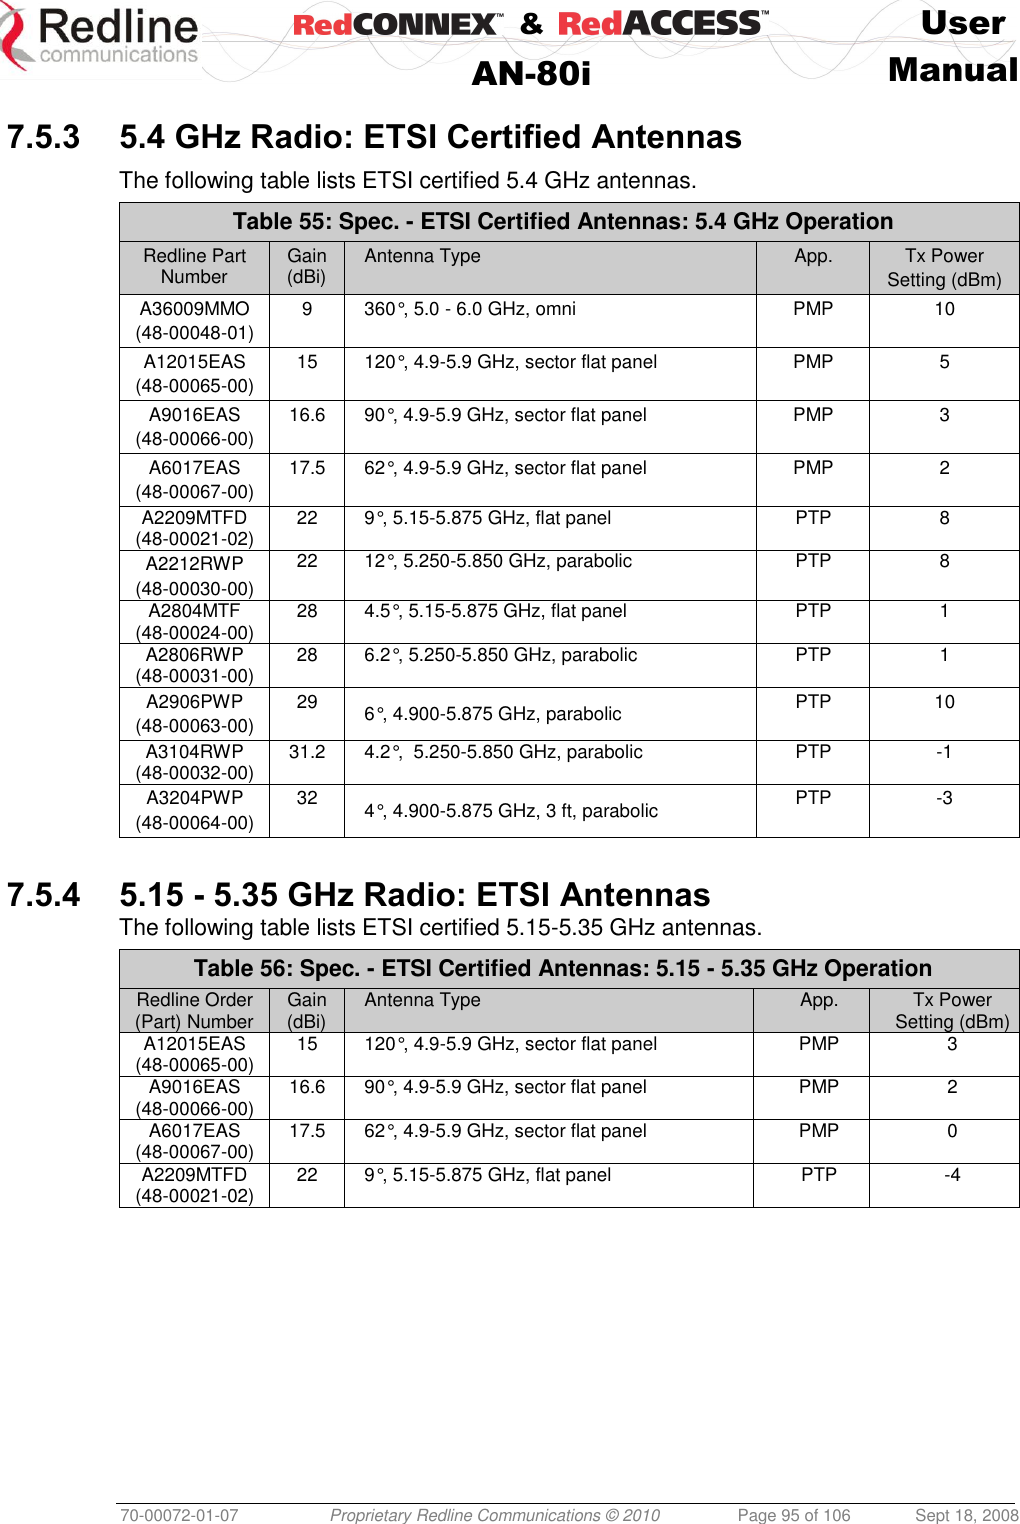    &amp;  User  AN-80i Manual  70-00072-01-07 Proprietary Redline Communications © 2010  Page 95 of 106  Sept 18, 2008  7.5.3 5.4 GHz Radio: ETSI Certified Antennas  The following table lists ETSI certified 5.4 GHz antennas. Table 55: Spec. - ETSI Certified Antennas: 5.4 GHz Operation Redline Part Number Gain (dBi) Antenna Type App. Tx Power Setting (dBm) A36009MMO  (48-00048-01) 9 360°, 5.0 - 6.0 GHz, omni PMP 10 A12015EAS  (48-00065-00) 15 120°, 4.9-5.9 GHz, sector flat panel PMP 5 A9016EAS (48-00066-00) 16.6 90°, 4.9-5.9 GHz, sector flat panel PMP 3 A6017EAS (48-00067-00) 17.5 62°, 4.9-5.9 GHz, sector flat panel PMP 2 A2209MTFD (48-00021-02) 22 9°, 5.15-5.875 GHz, flat panel PTP 8 A2212RWP  (48-00030-00) 22 12°, 5.250-5.850 GHz, parabolic PTP 8 A2804MTF (48-00024-00) 28 4.5°, 5.15-5.875 GHz, flat panel PTP 1 A2806RWP  (48-00031-00) 28 6.2°, 5.250-5.850 GHz, parabolic PTP 1 A2906PWP  (48-00063-00) 29 6°, 4.900-5.875 GHz, parabolic PTP 10 A3104RWP  (48-00032-00) 31.2 4.2°,  5.250-5.850 GHz, parabolic PTP -1 A3204PWP (48-00064-00) 32 4°, 4.900-5.875 GHz, 3 ft, parabolic PTP -3  7.5.4 5.15 - 5.35 GHz Radio: ETSI Antennas The following table lists ETSI certified 5.15-5.35 GHz antennas. Table 56: Spec. - ETSI Certified Antennas: 5.15 - 5.35 GHz Operation Redline Order (Part) Number Gain (dBi) Antenna Type App. Tx Power Setting (dBm) A12015EAS  (48-00065-00) 15 120°, 4.9-5.9 GHz, sector flat panel PMP 3 A9016EAS (48-00066-00) 16.6 90°, 4.9-5.9 GHz, sector flat panel PMP 2 A6017EAS (48-00067-00) 17.5 62°, 4.9-5.9 GHz, sector flat panel PMP 0 A2209MTFD (48-00021-02) 22 9°, 5.15-5.875 GHz, flat panel PTP -4  